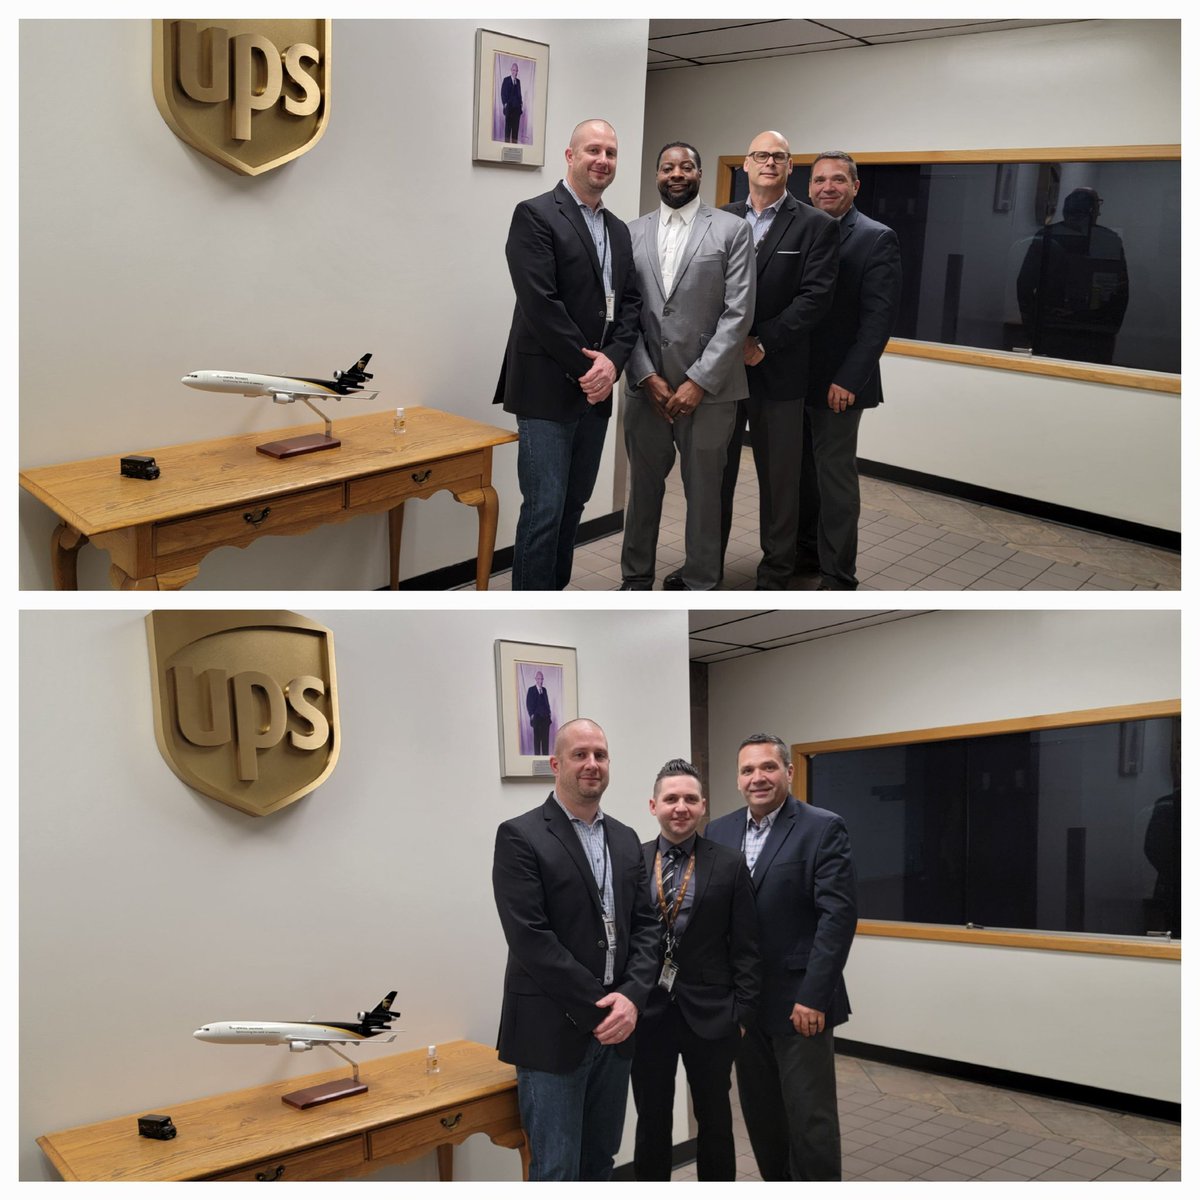 #TeamPHLSnaps @RayBarczak @daveortone @JohnEitel2 @RaymondChew95 @LaurenCarroll44 @UPSers Congratulations to our partners on their promotions @JamesSm03402046 on his promotion to PHL Twilight Hub Manager and to @BobKee6 promotion to Senior Lead Manager for the PHL Night Sort.